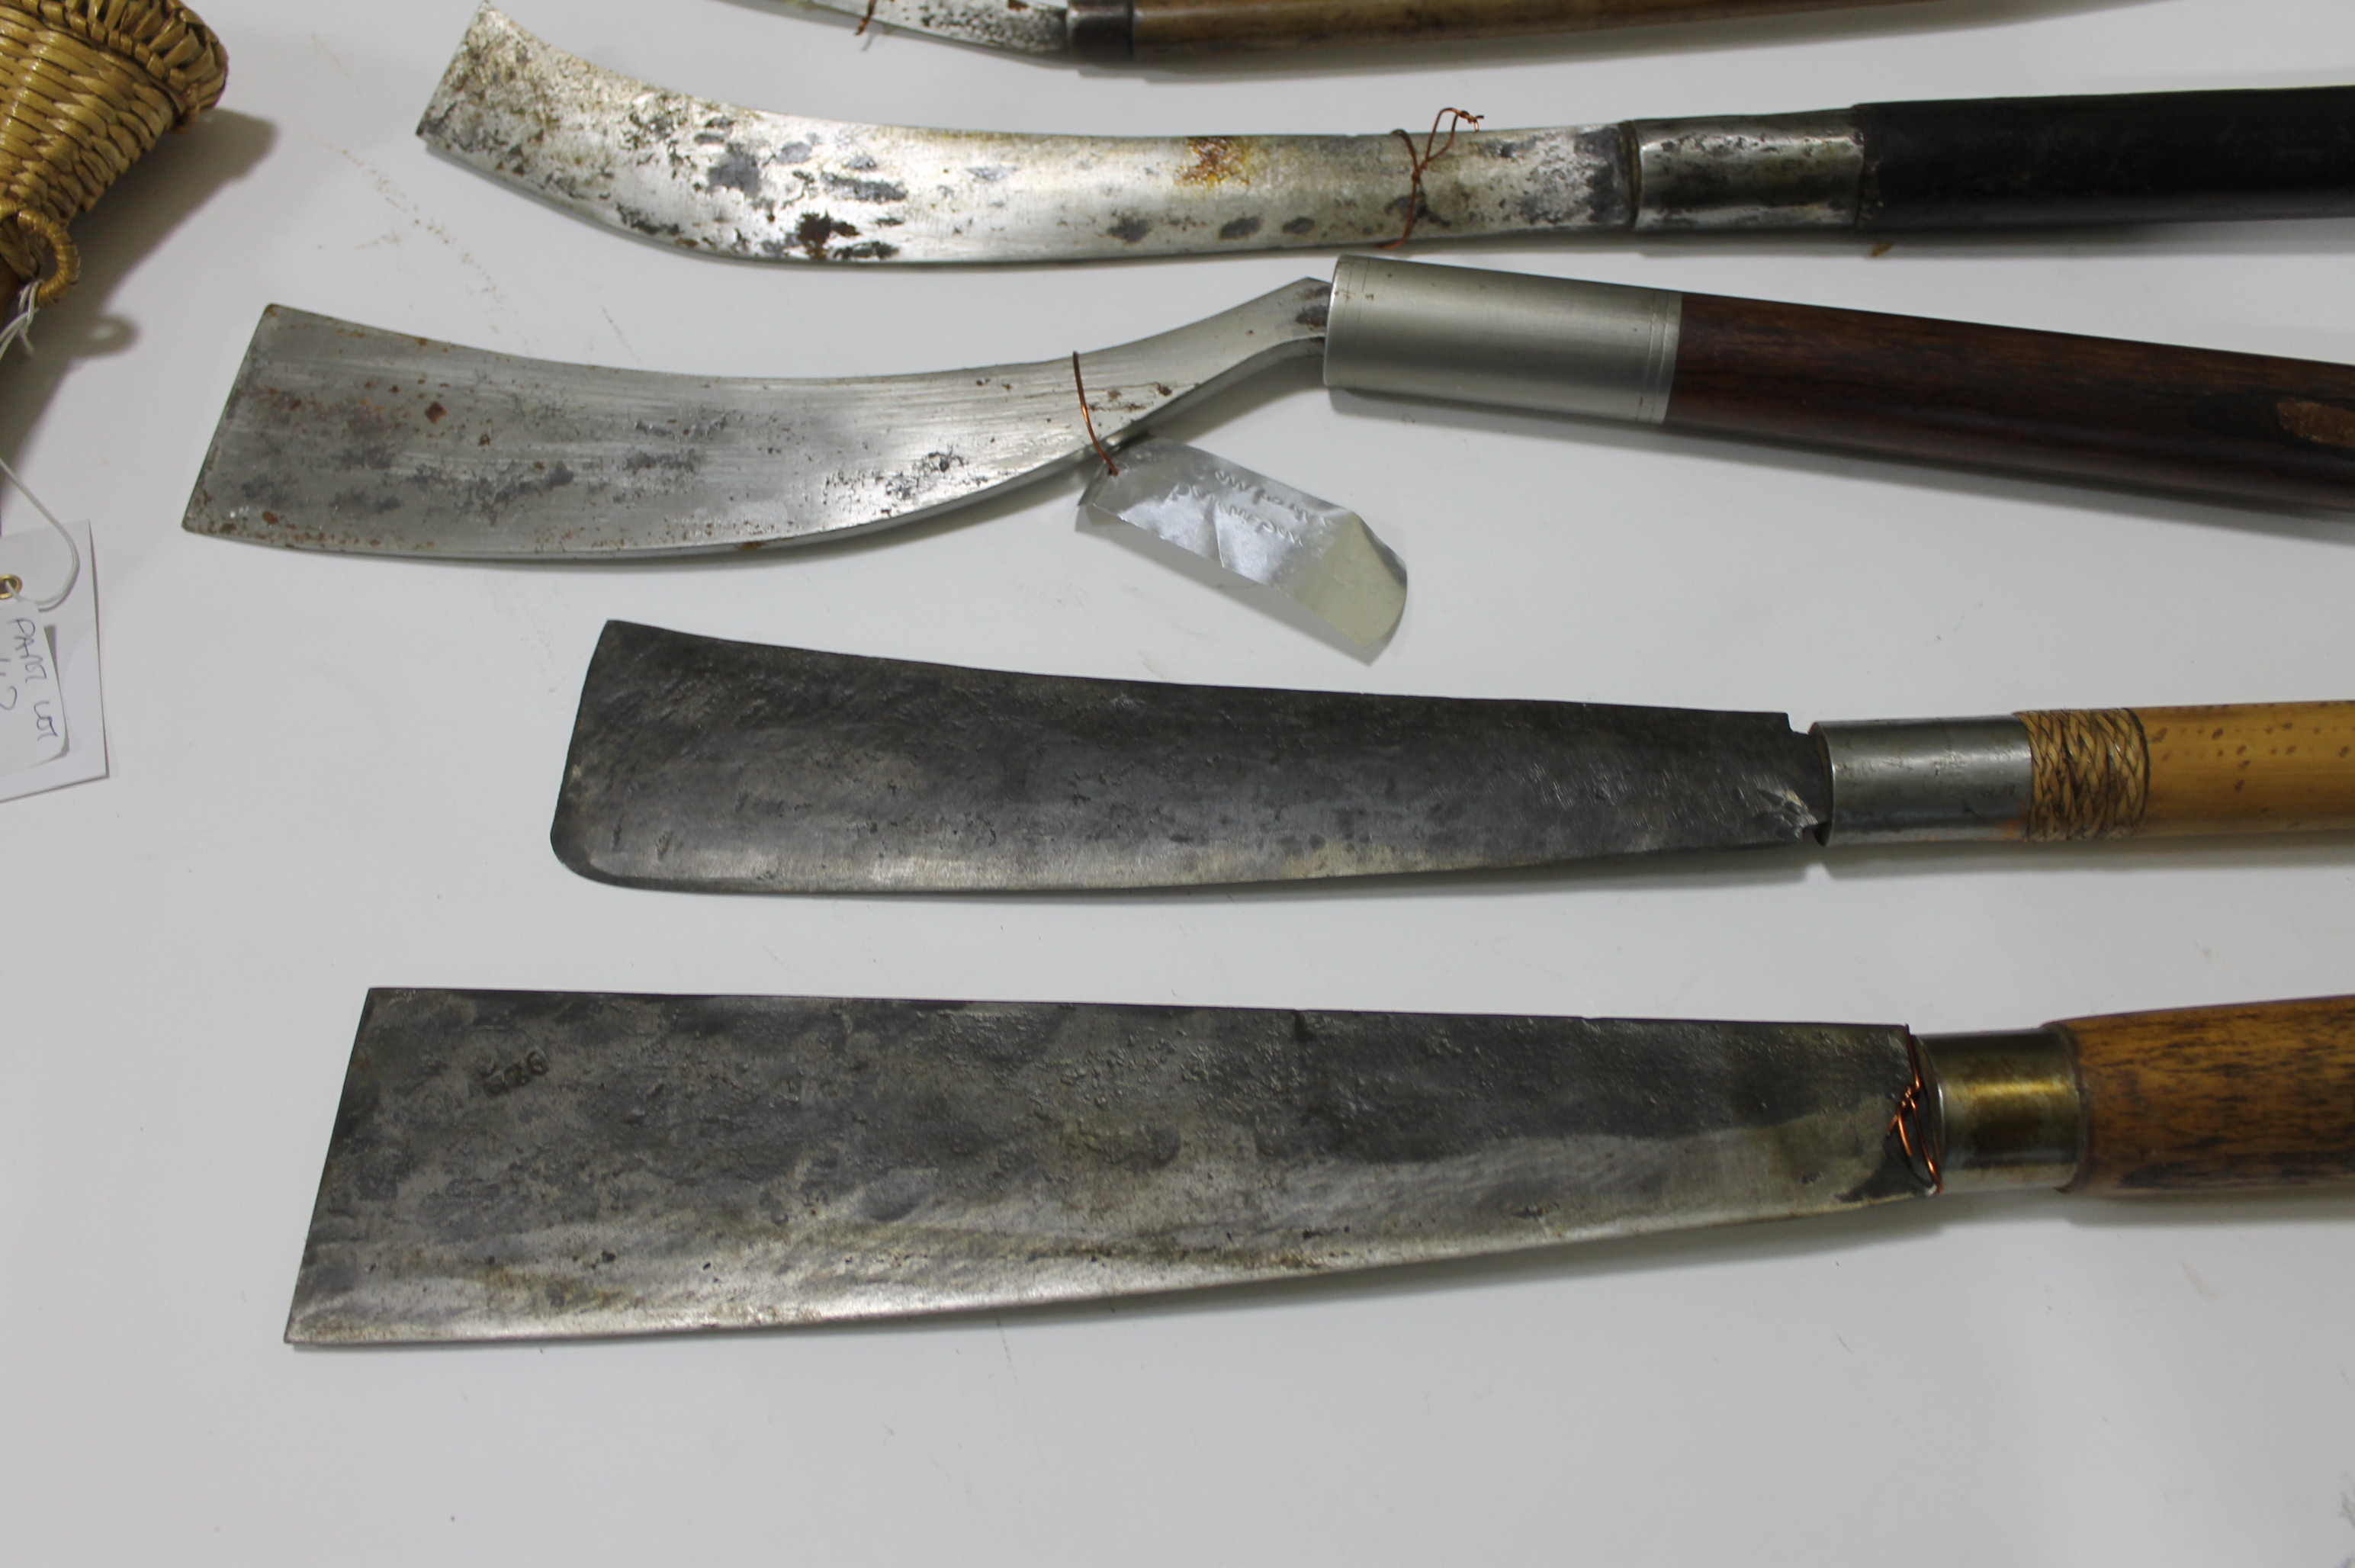 EASTERN KNIVES. Five Eastern knives including a Cambodian Machete style knife with a 10" blade, - Image 4 of 6